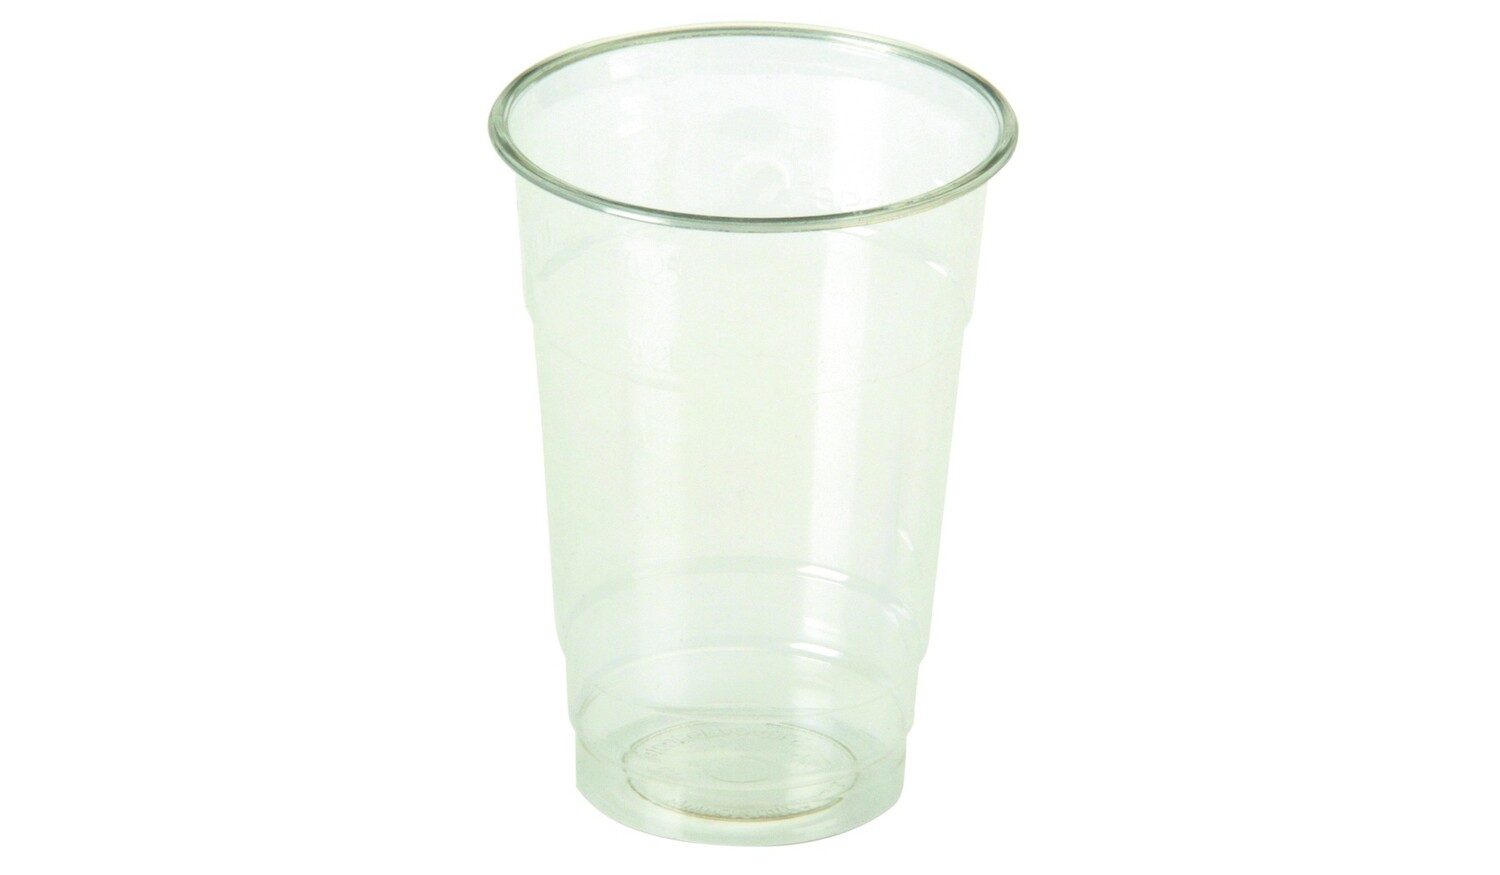 Drinking glass - 2dl calibrated